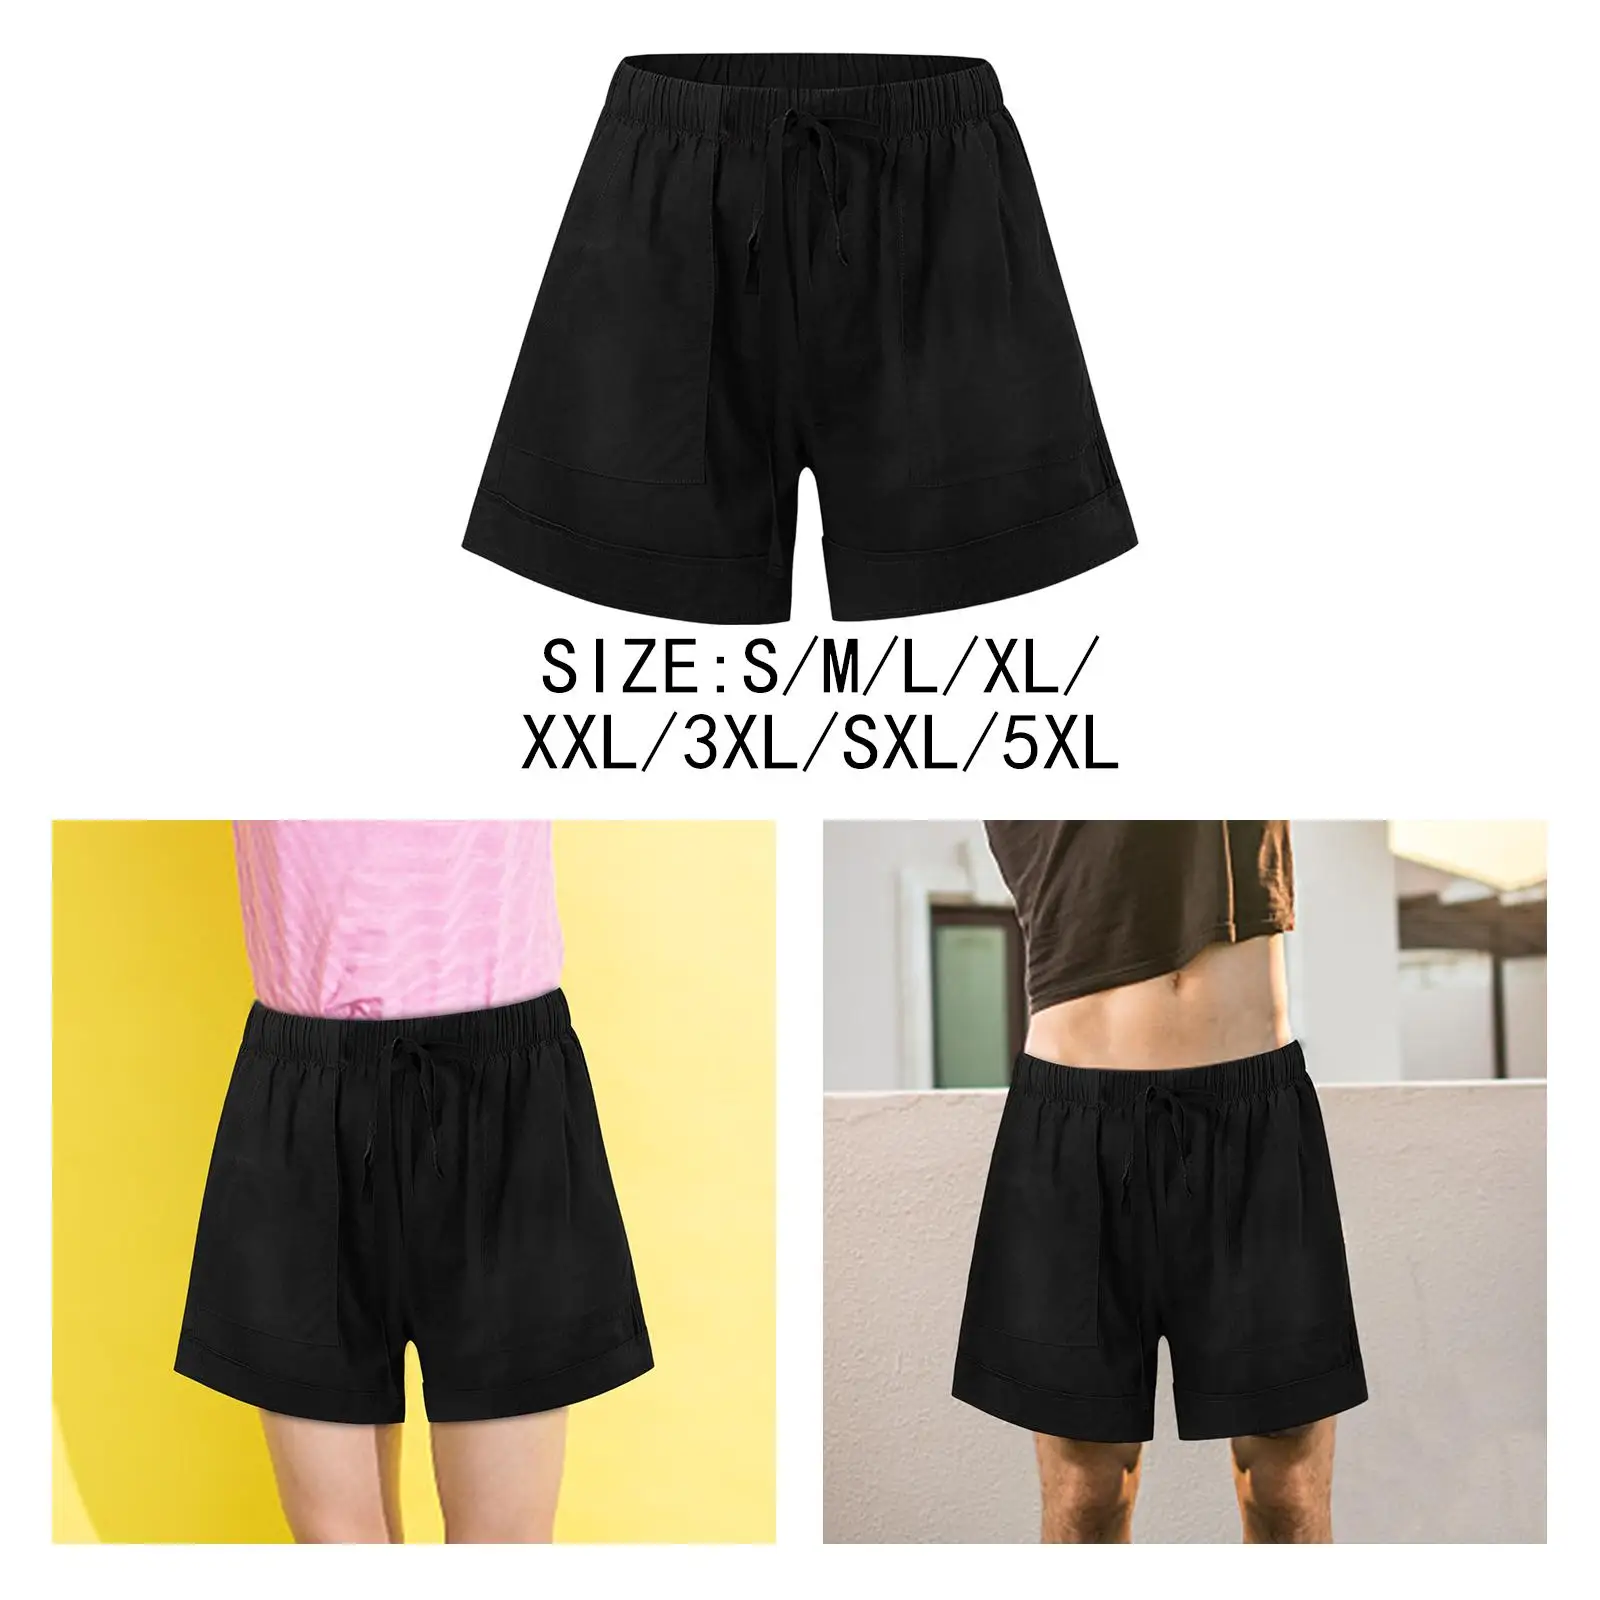 Casual Short Pants Pocketed Shorts Comfort Shorts Elastic Waist Women Drawstring Shorts with Pocket for Workout Gym Beach Summer